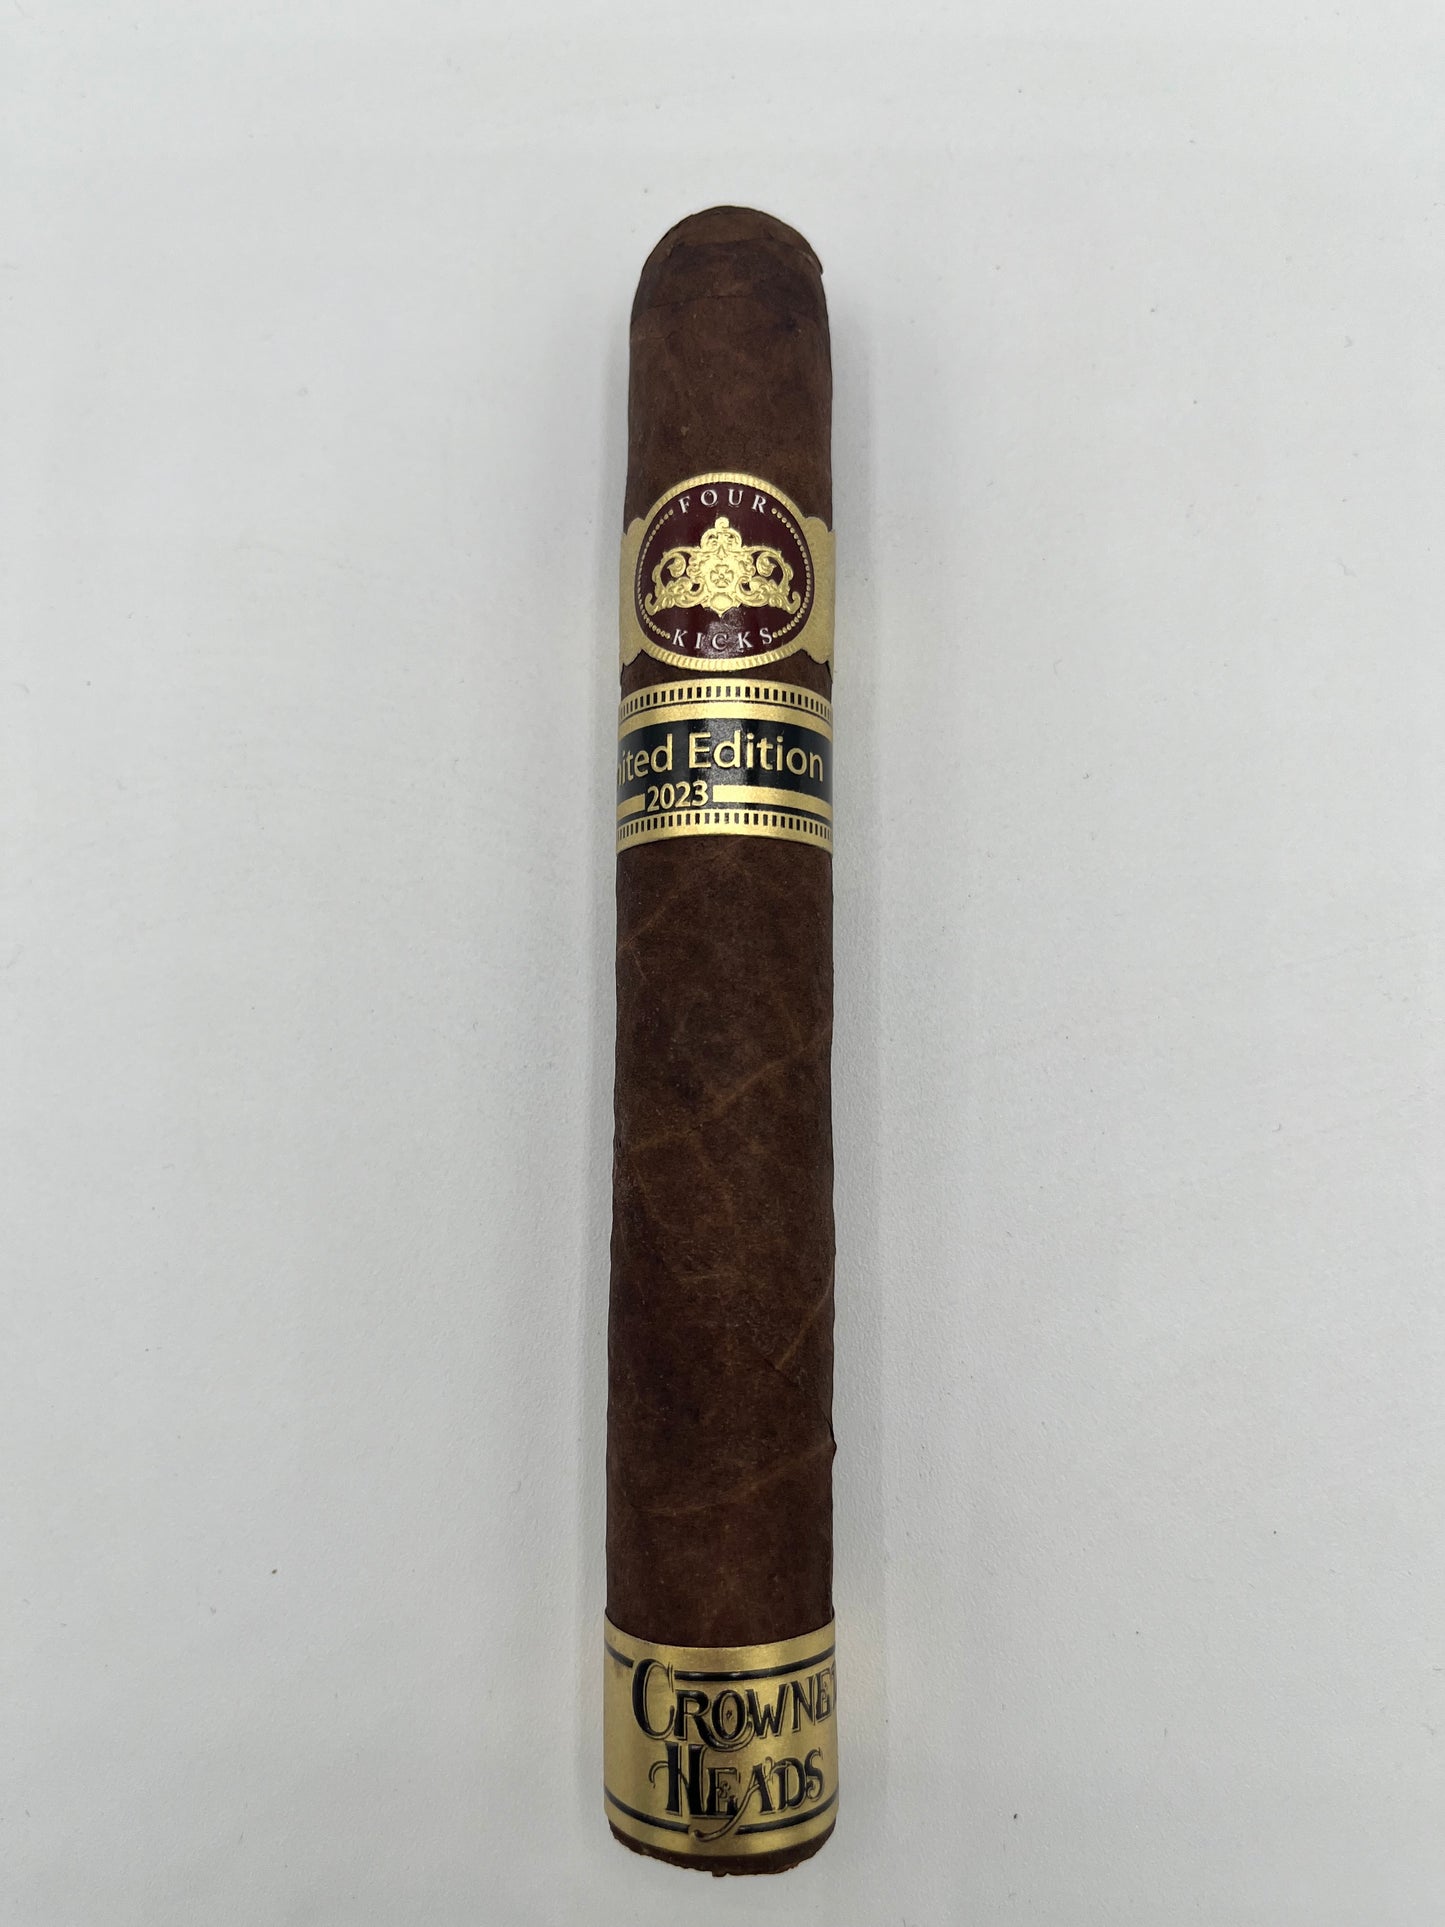 Four Kicks Mule Kick 2023 Limited Edition by Crowned Heads